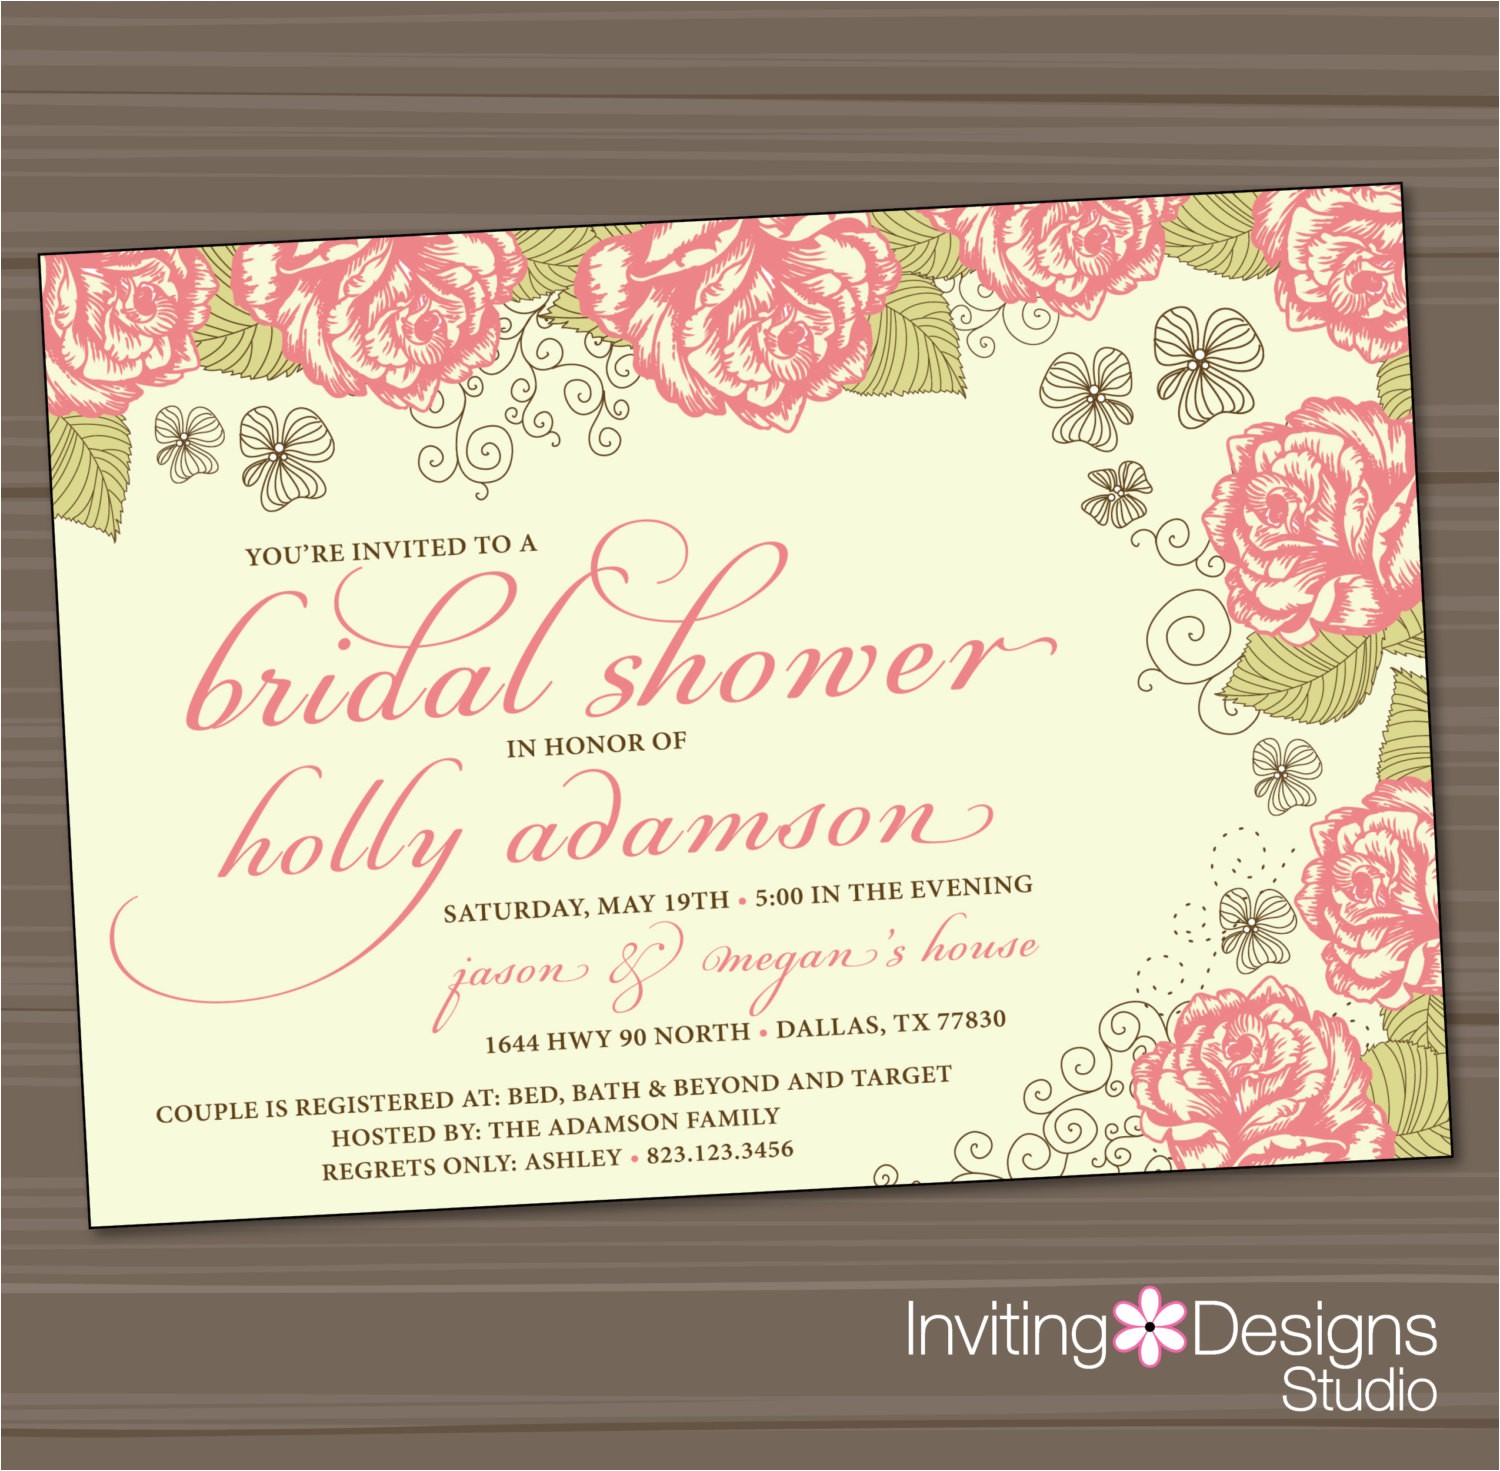 Wholesale Baby Shower Invitations Cheap Baby Shower Invitations In Bulk